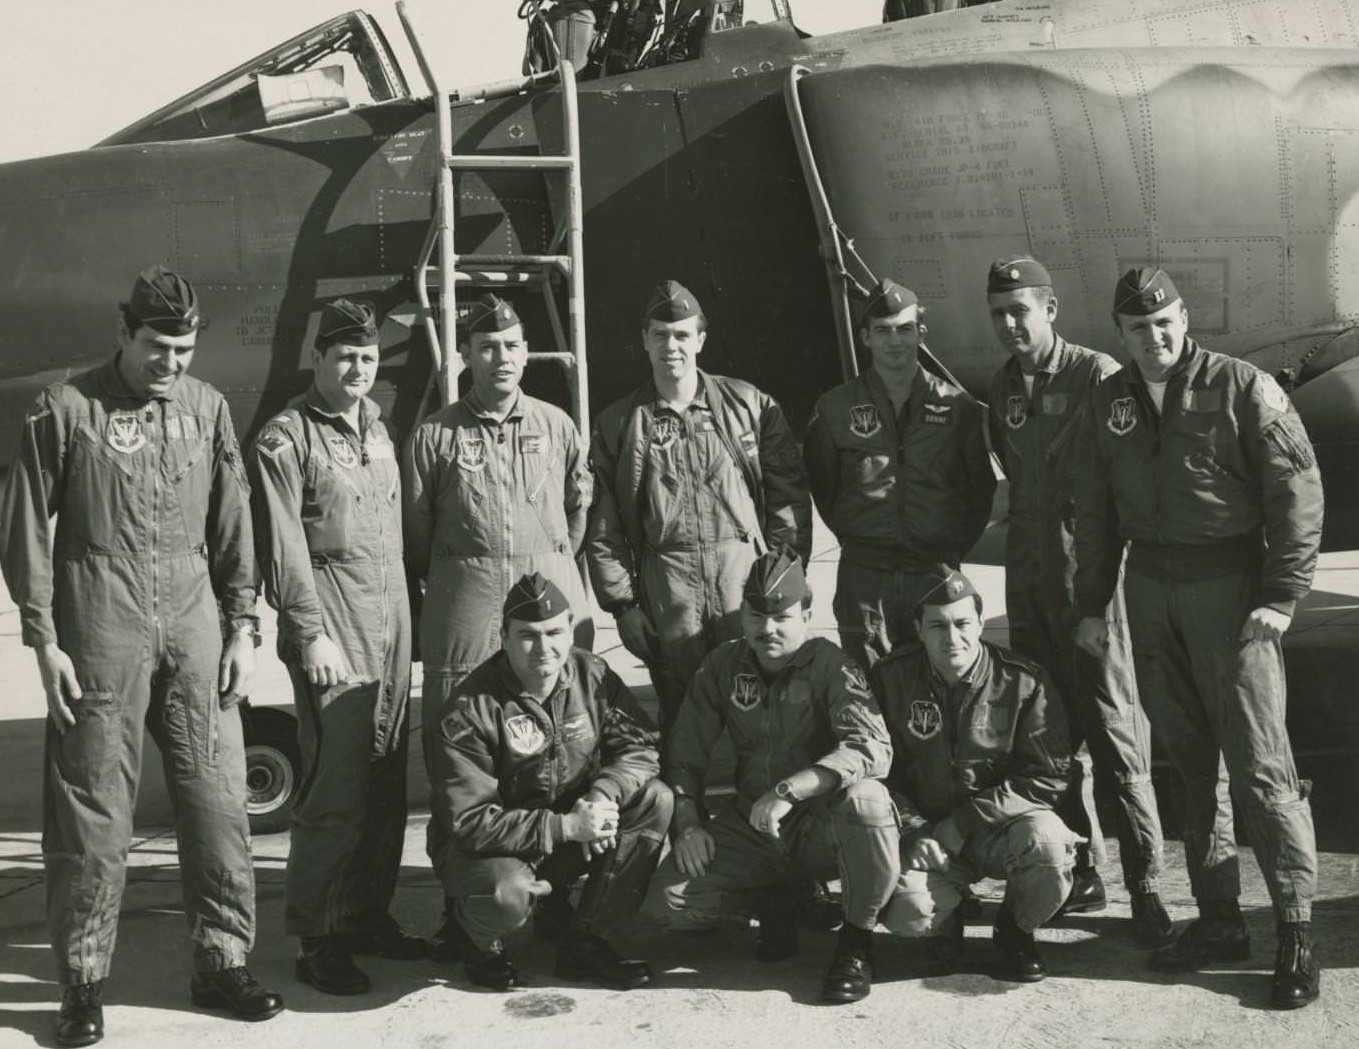 Aircrew Class 70-8B in Front of Plane, 1970